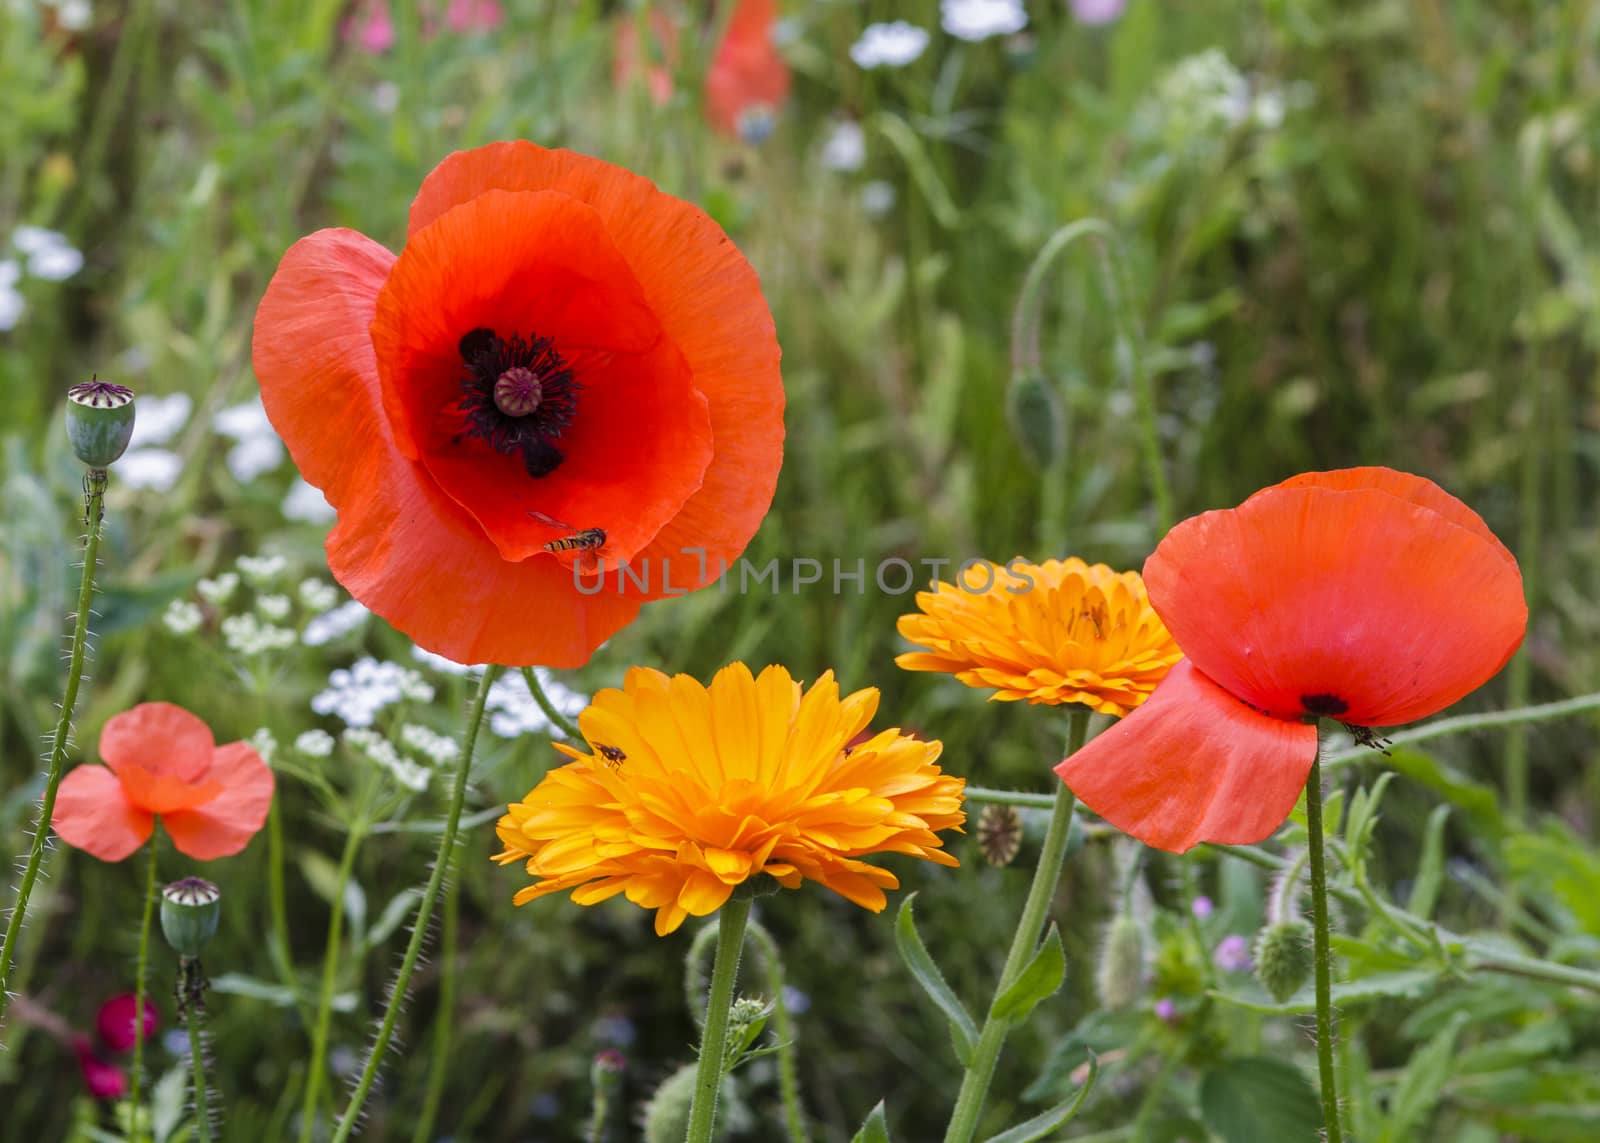 Wild flowers with poppies